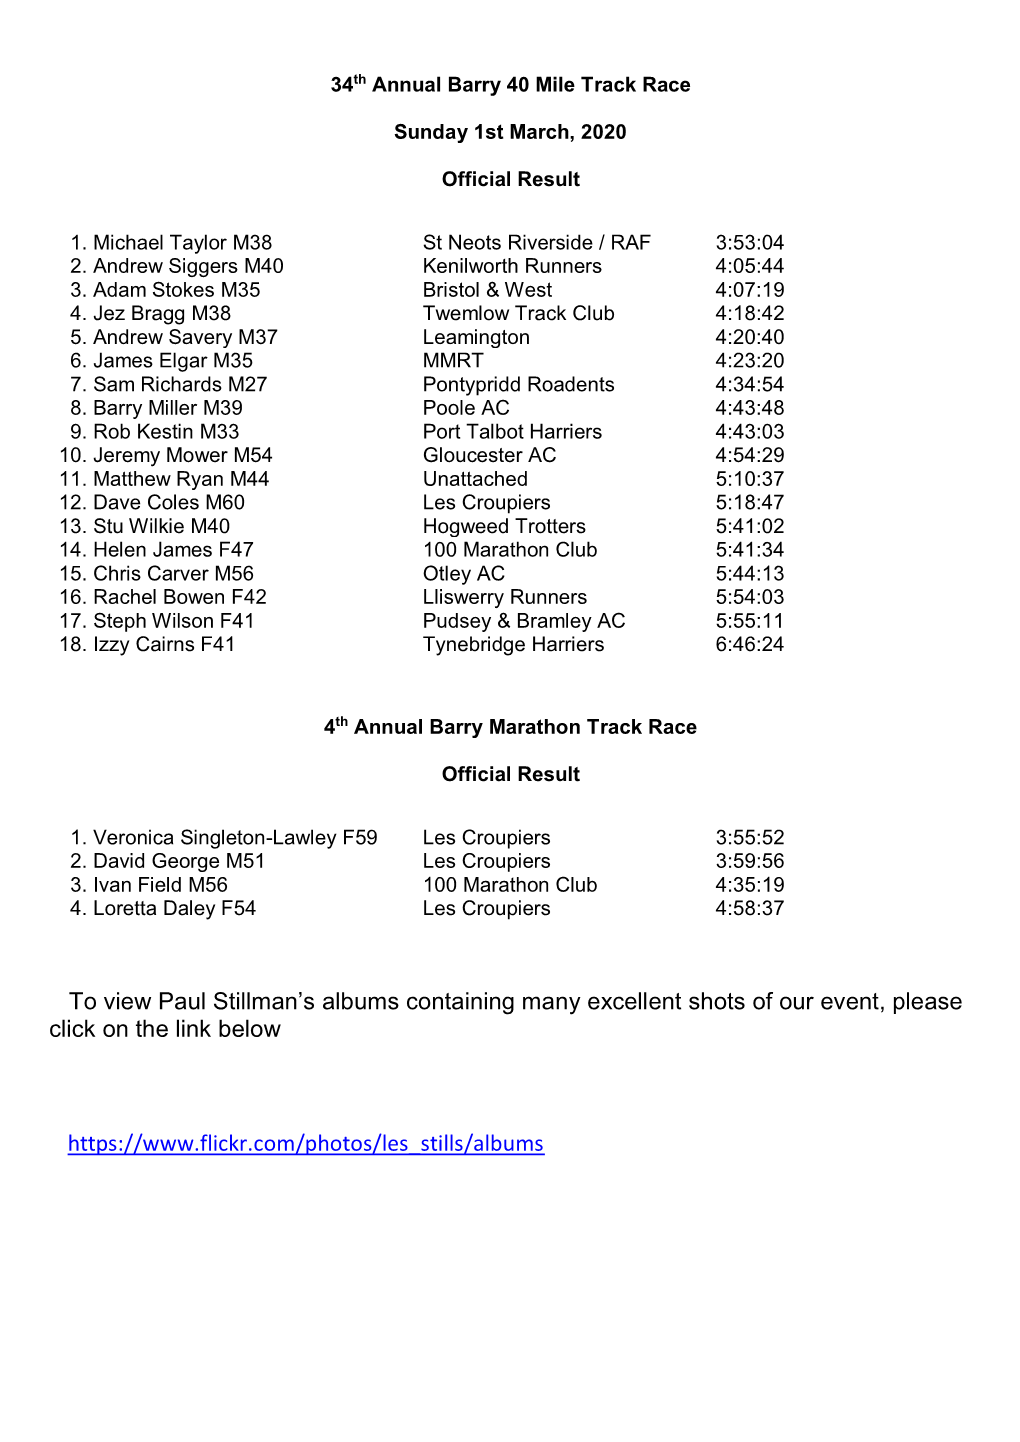 Race Results and Report